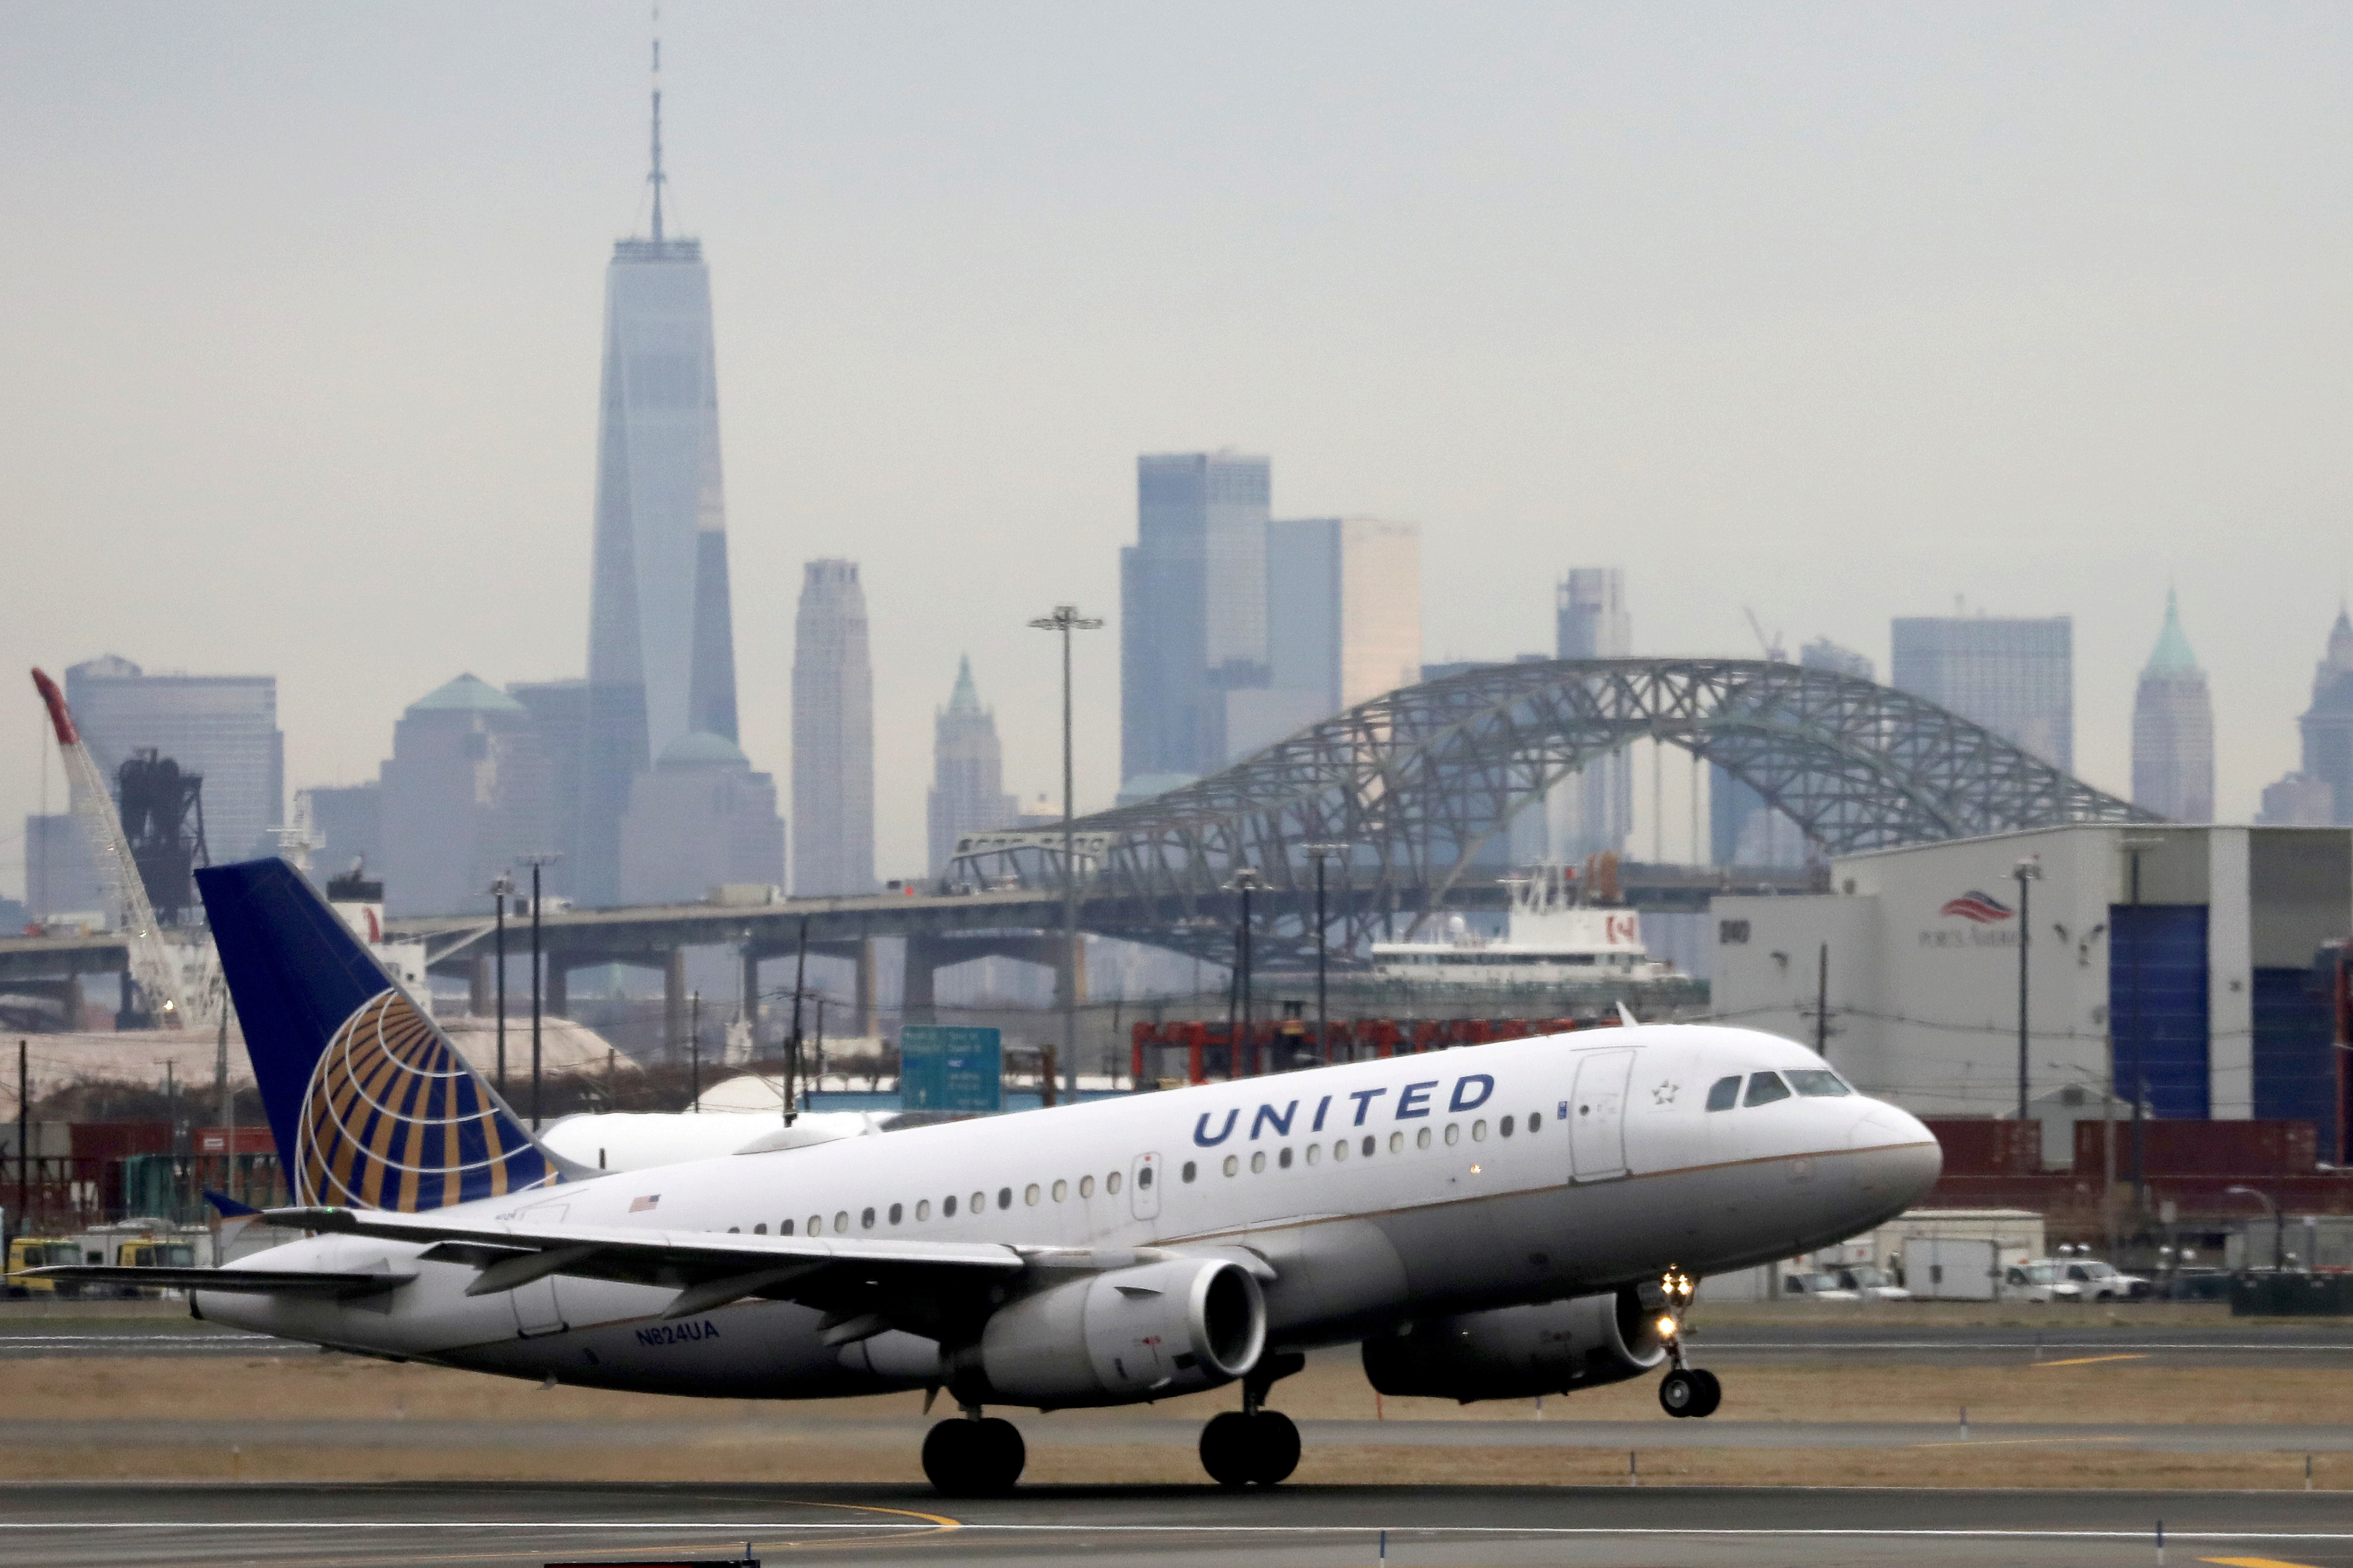 A United Airlines passenger jet takes off with New York City as a backdrop, at Newark Liberty International Airport, New Jersey, U.S. December 6, 2019. REUTERS/Chris Helgren